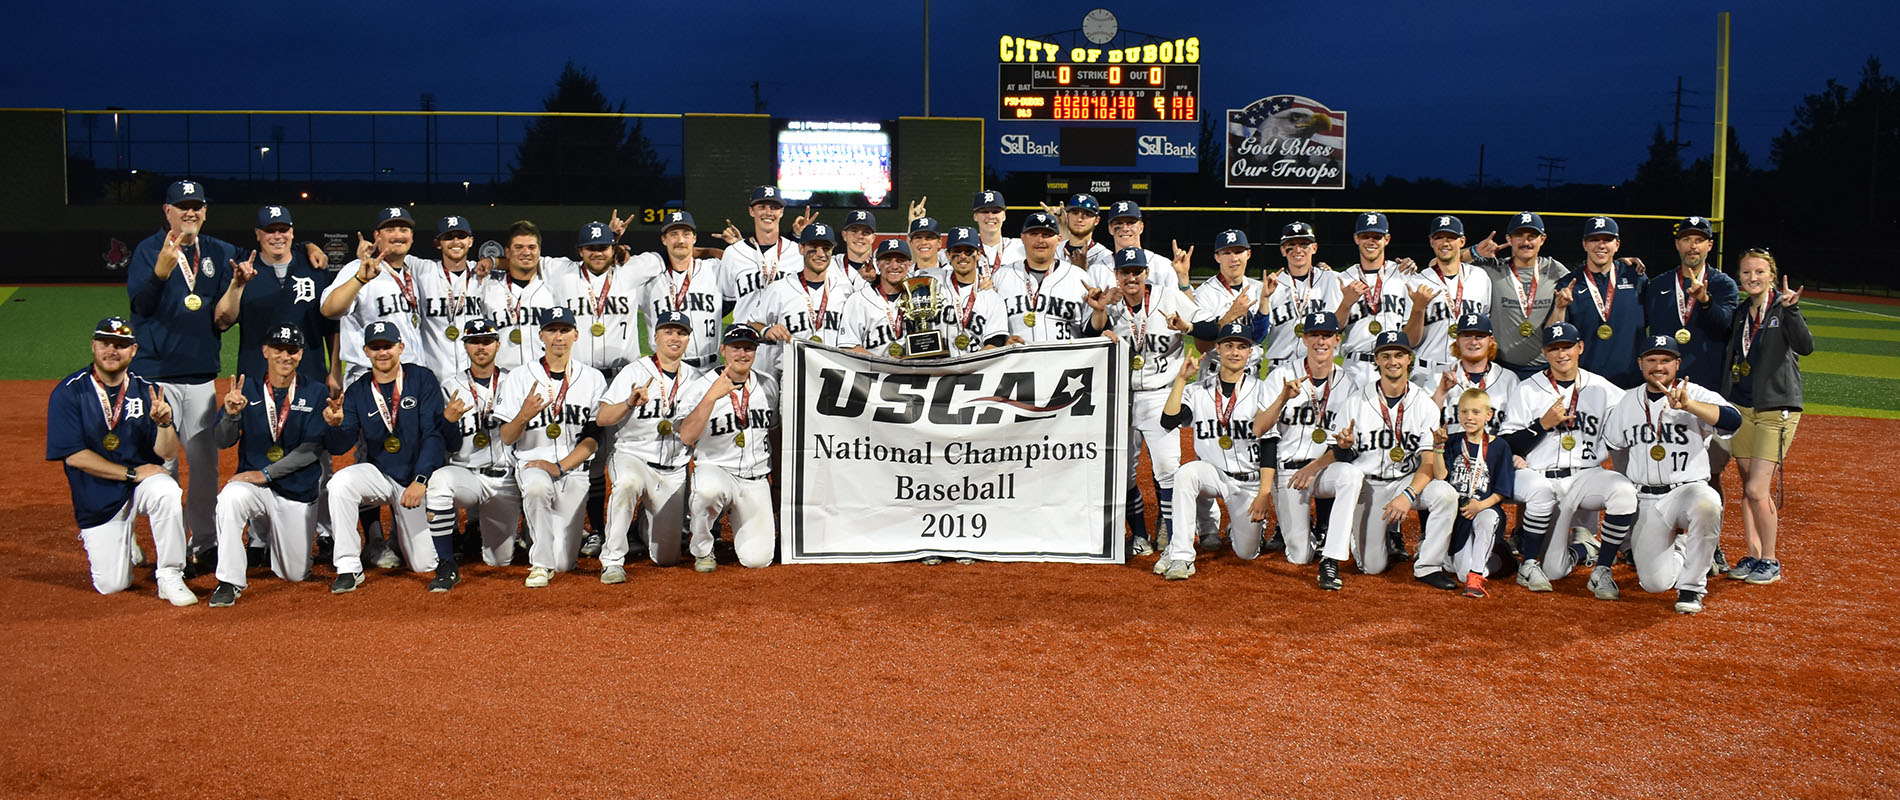 Penn State DuBois won the 2019 USCAA Baseball Small College World Series, their second consecutive USCAA National Championship.
Photo courtesy of DuBois Athletics.